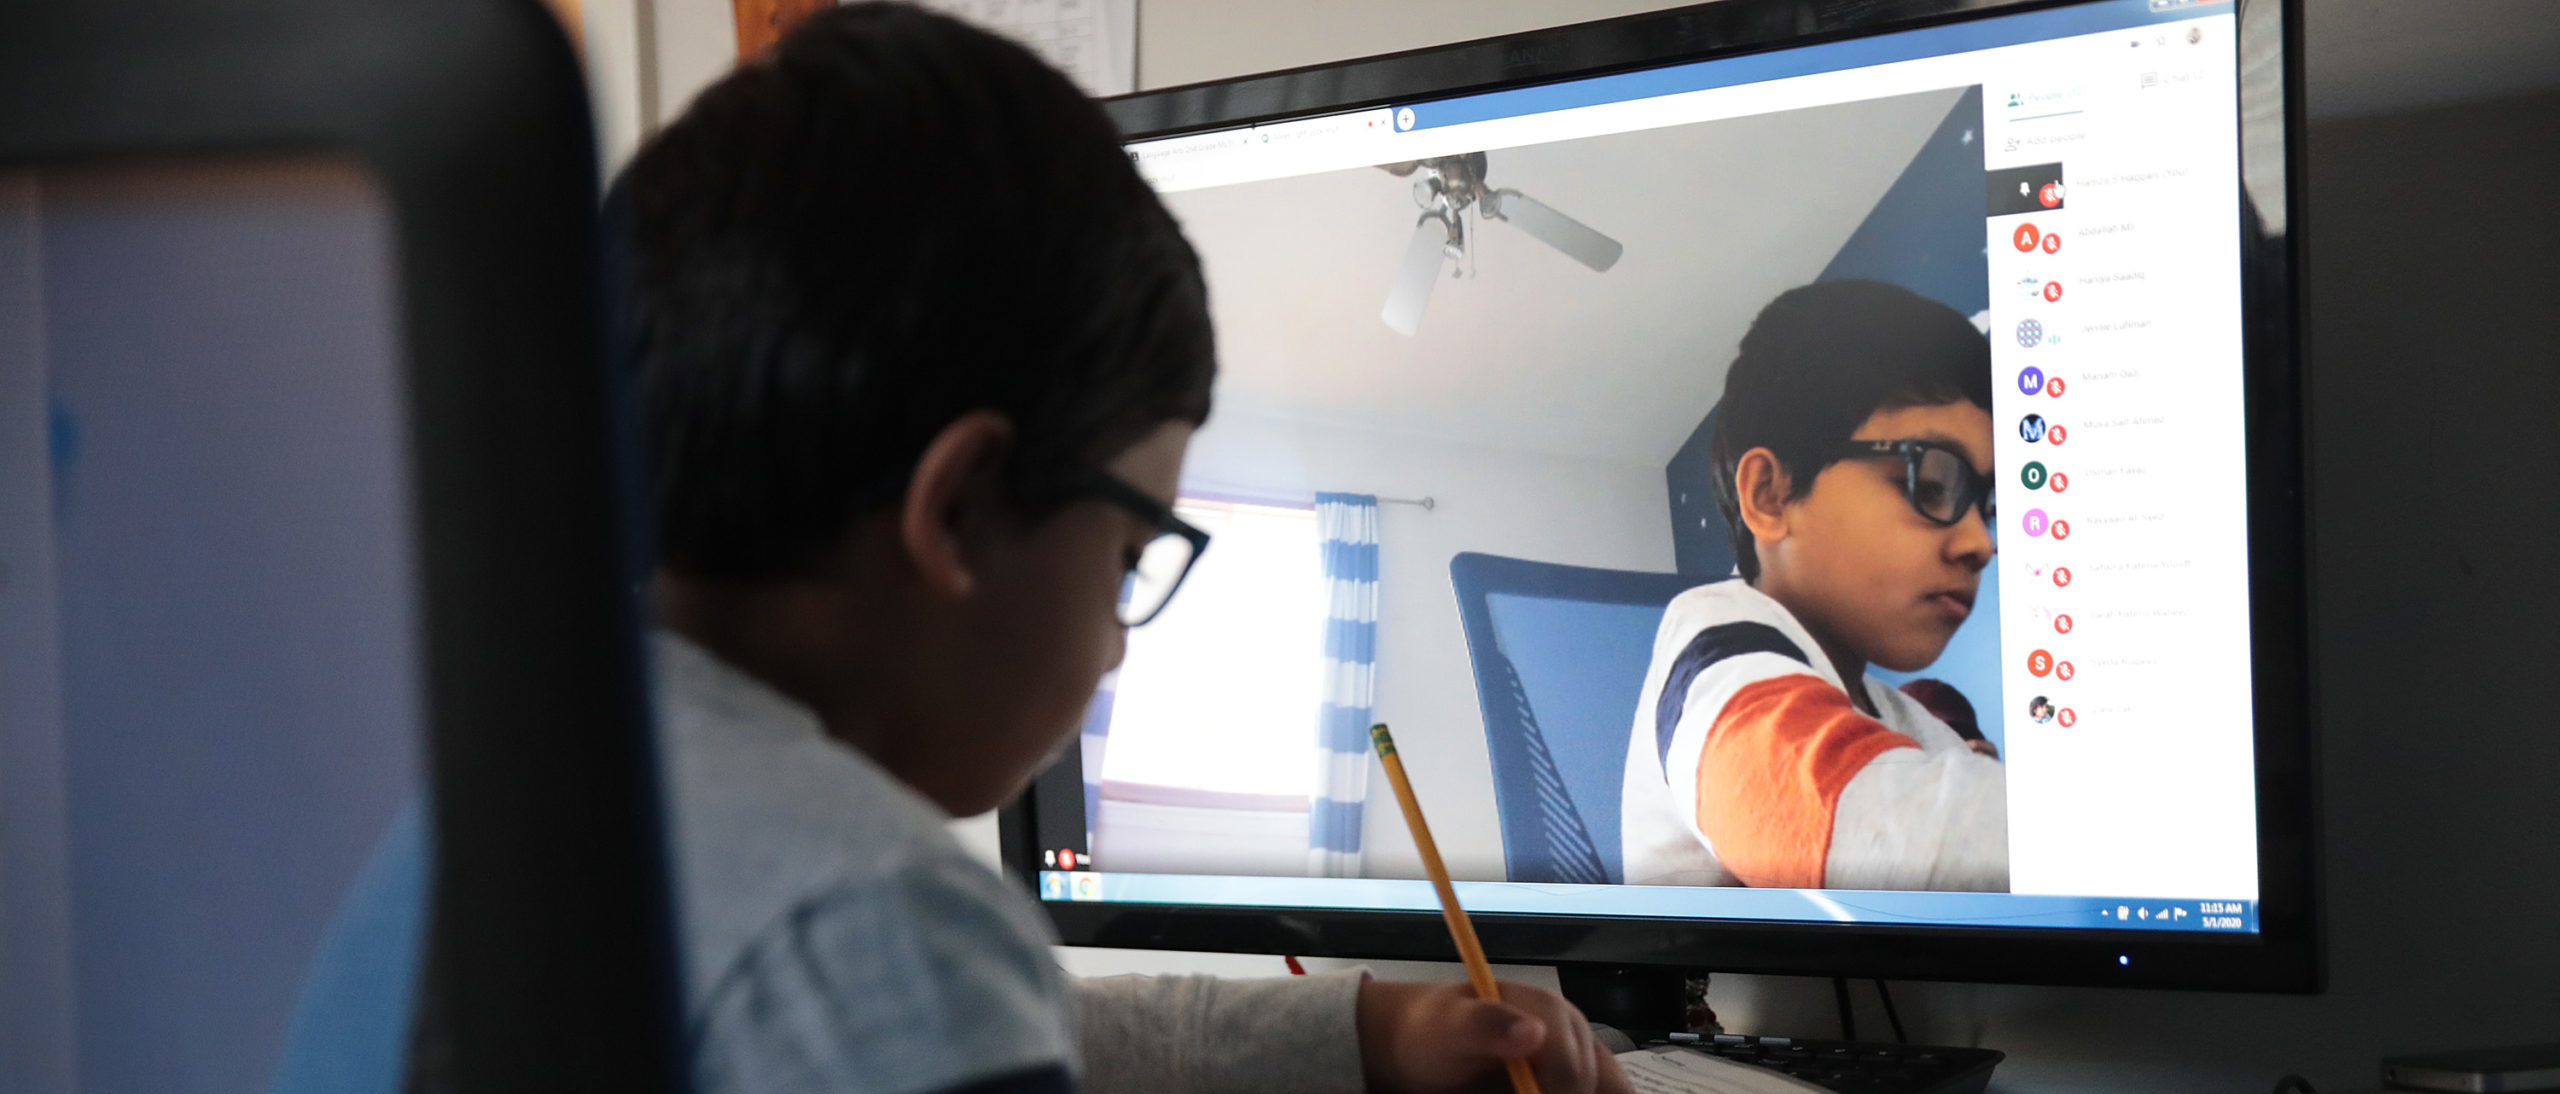 Seven-year-old Hamza Haqqani, a 2nd grade student at Al-Huda Academy, uses a computer to participate in an E-learning class with his teacher and classmates while at his home on May 01, 2020 in Bartlett, Illinois. Al-Huda Academy, an Islam based private school that teaches pre-school through the 6th grade students, has had to adopt an E-learning program to finish the school year after all schools in the state were forced to cancel classes in an attempt to curtail the spread of the COVID-19 pandemic. (Photo by Scott Olson/Getty Images)